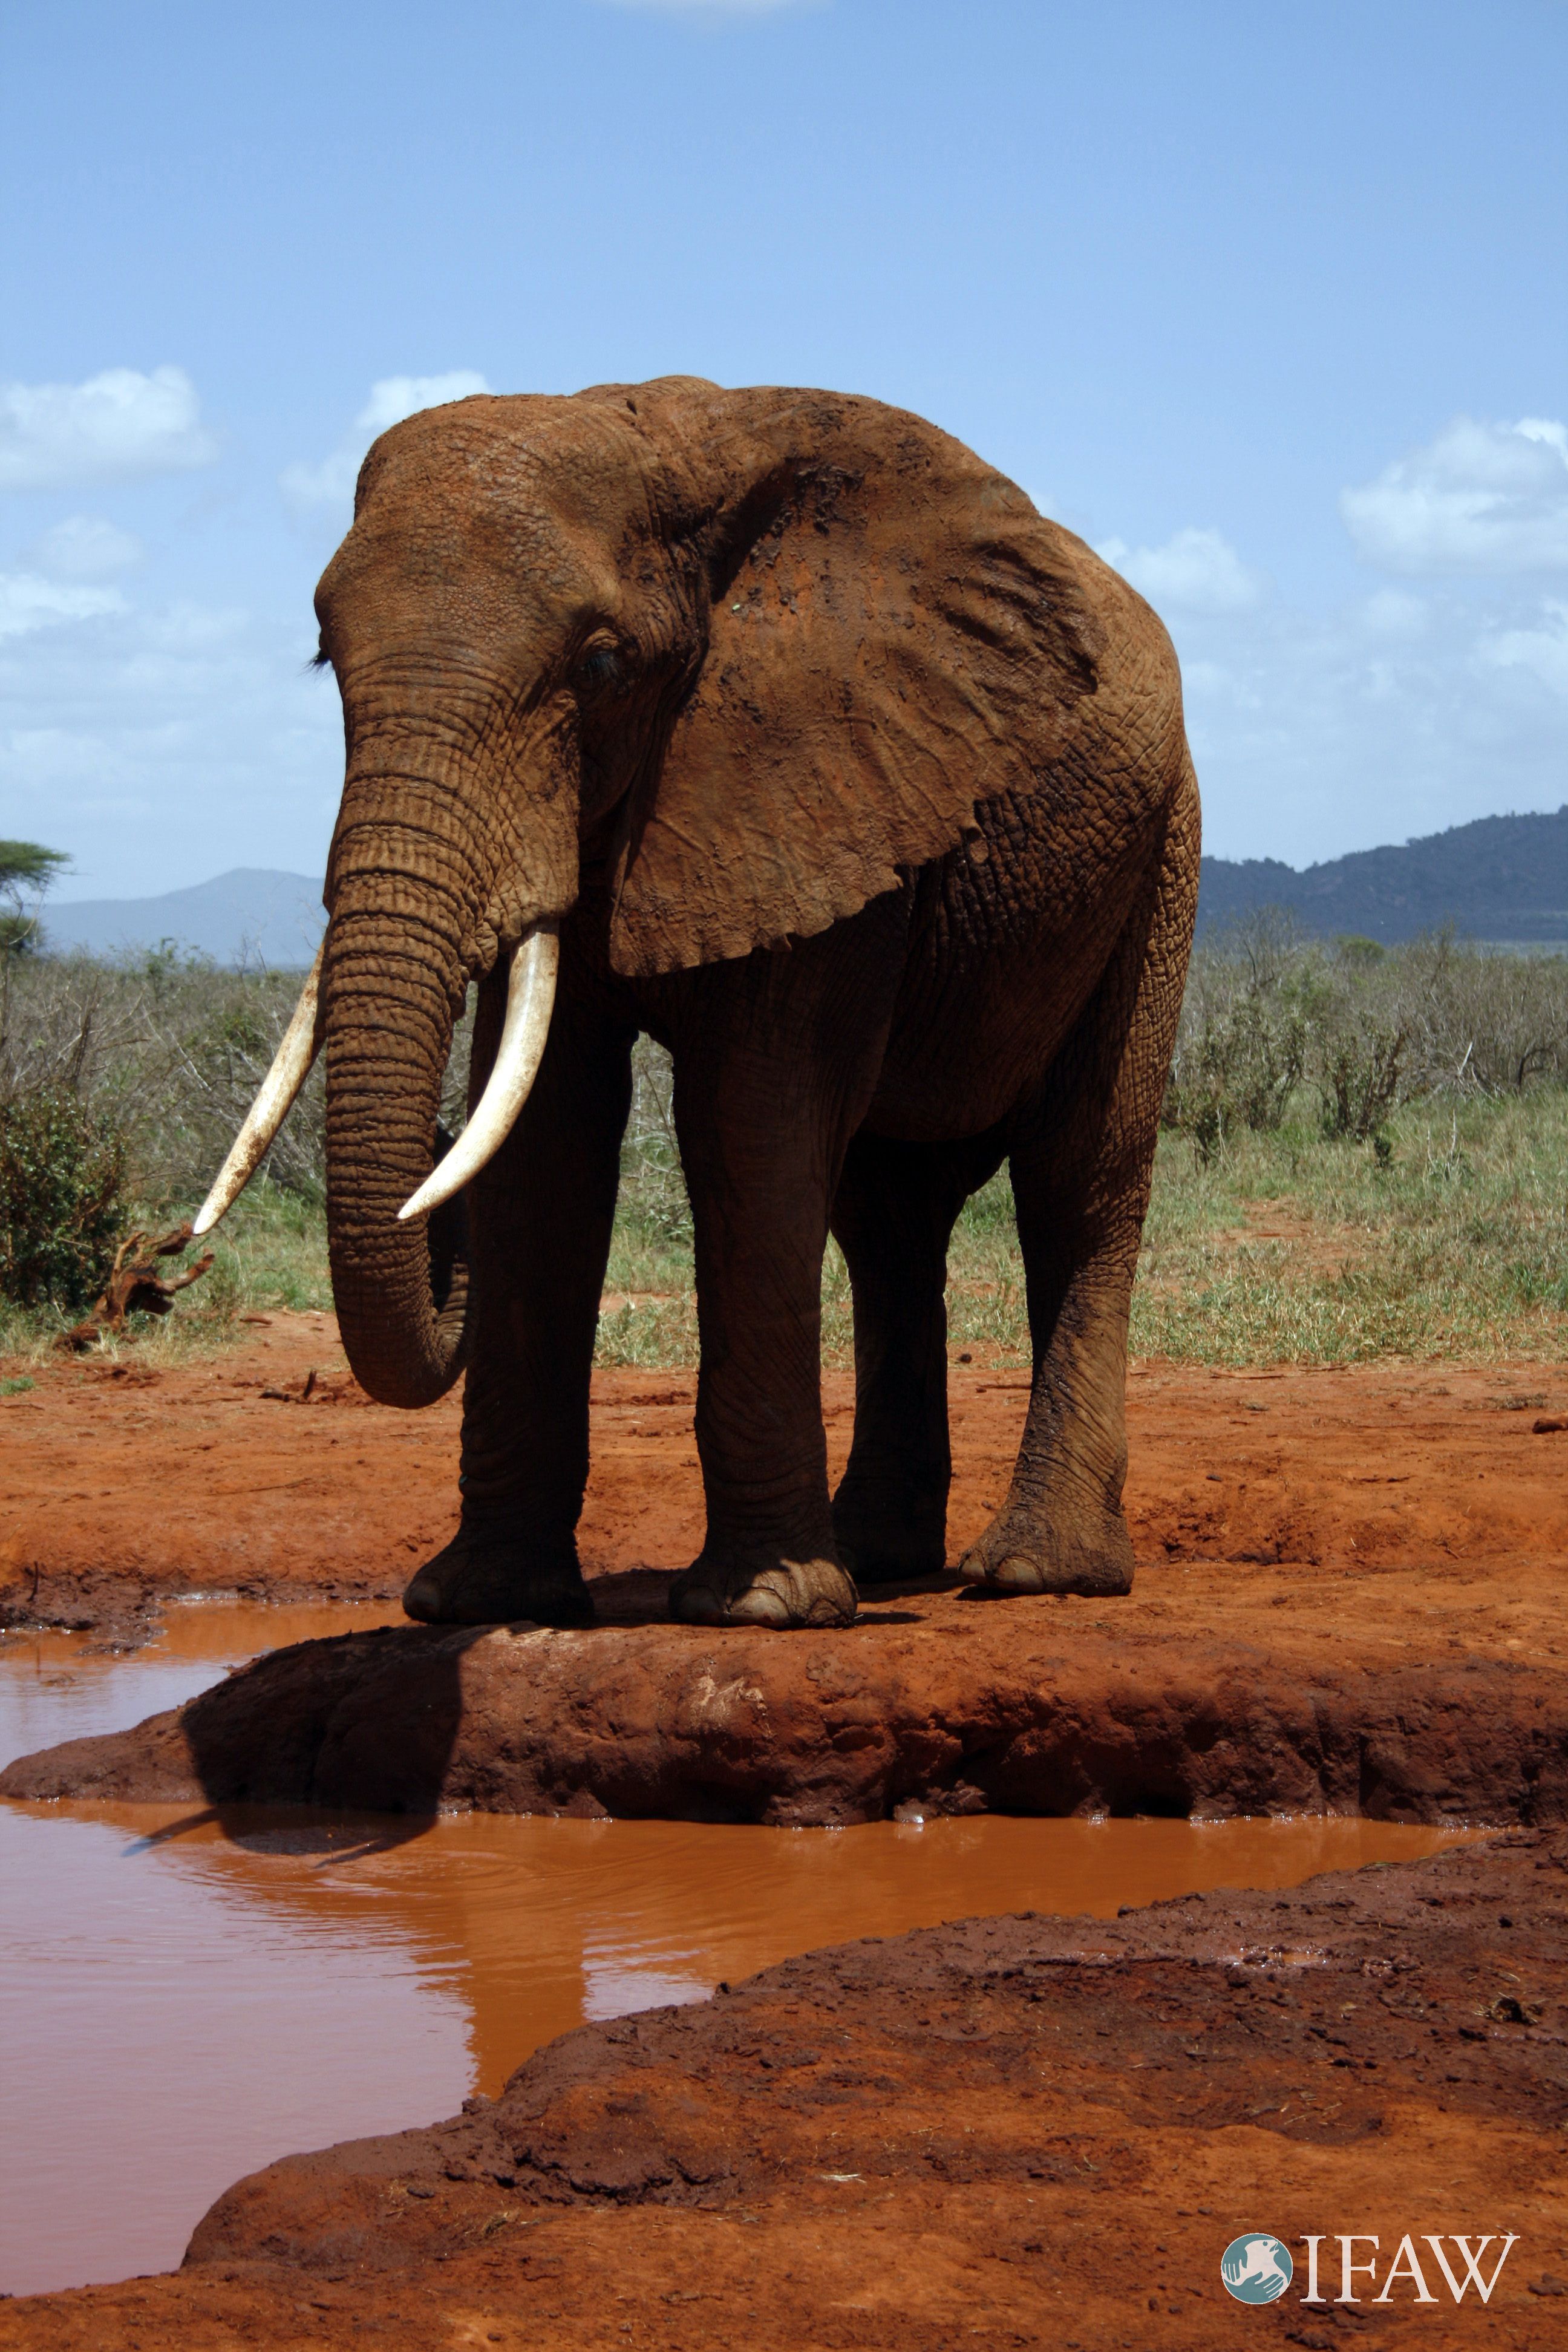 An elephant is killed for its ivory every fifteen minutes. Sign up ...